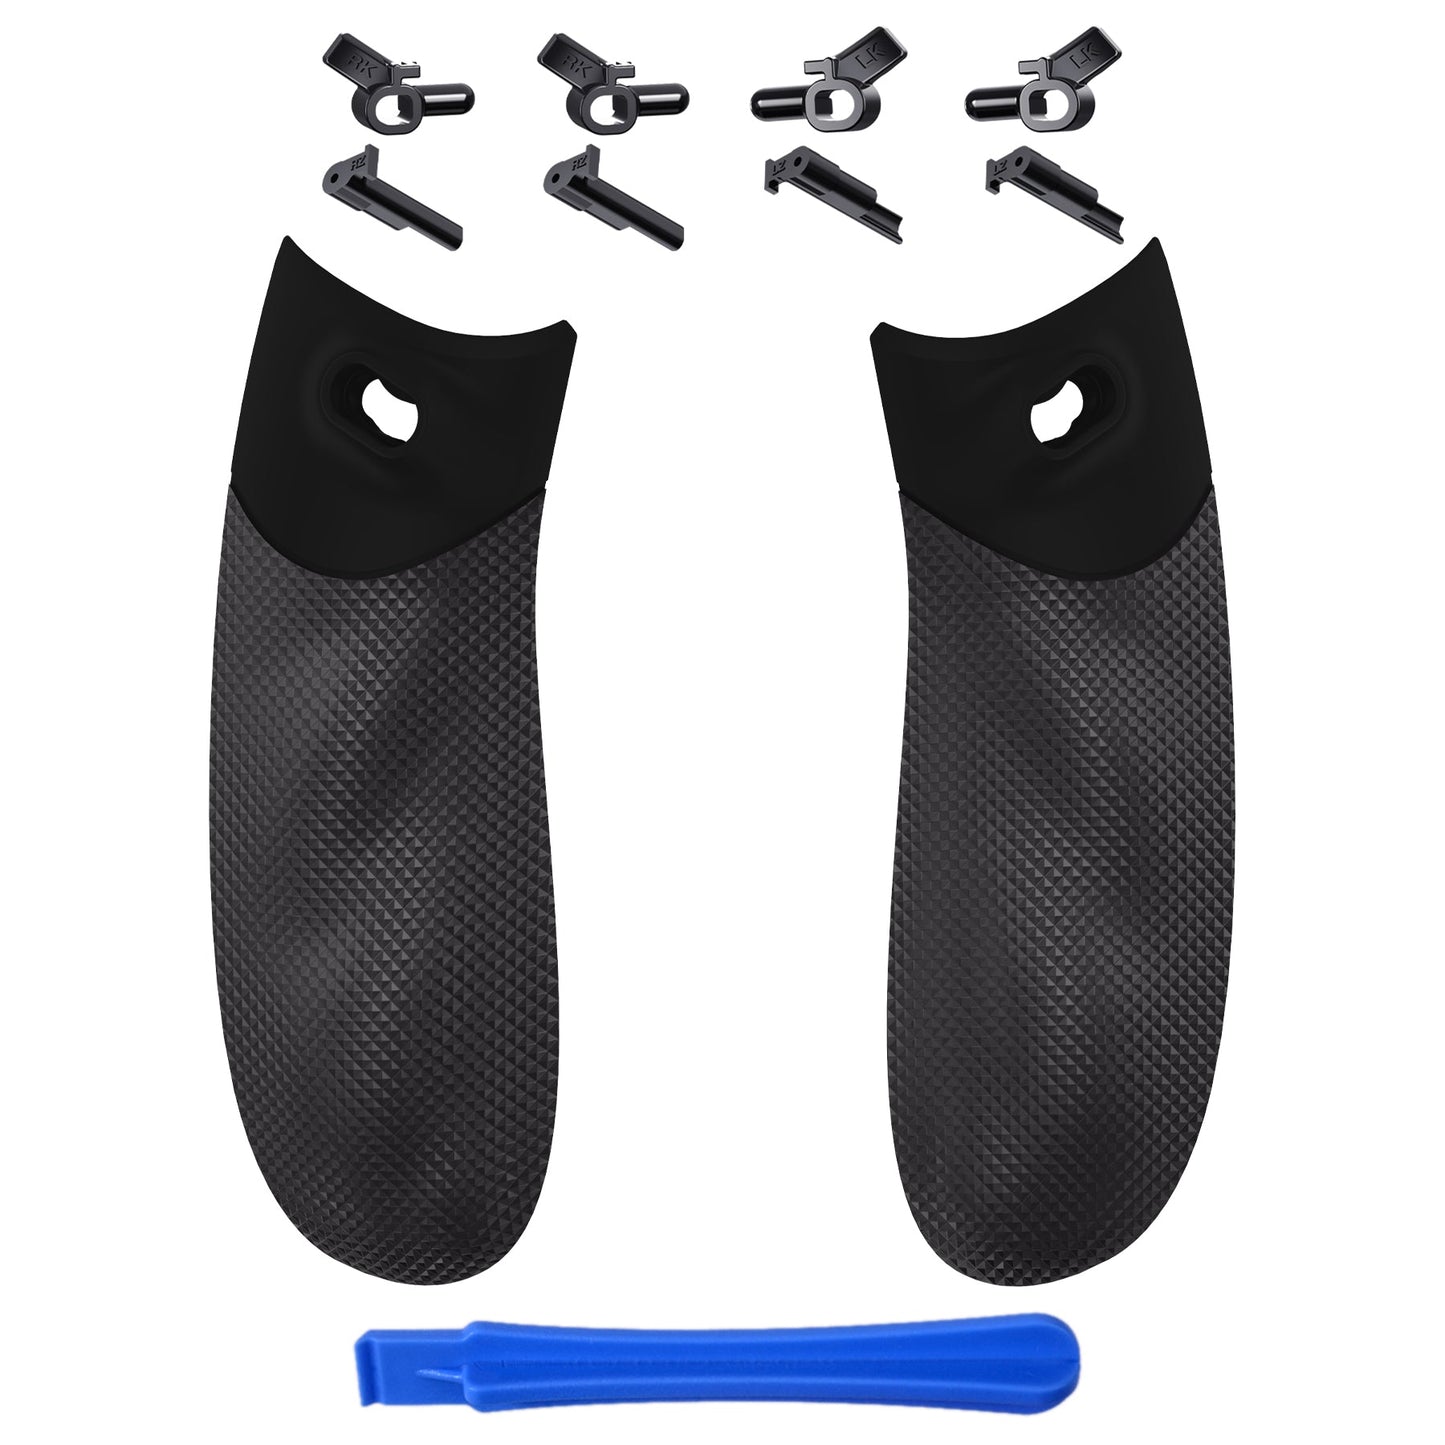 eXtremeRate Retail Black FLEXOR Rubberized Side Rails Grips Trigger Stop Kit for Xbox Series X/S Controller, Anti-Slip Ergonomic Trigger Stopper Handle Grips for Xbox Core Controller - Diamond Textured - PX3Q3001